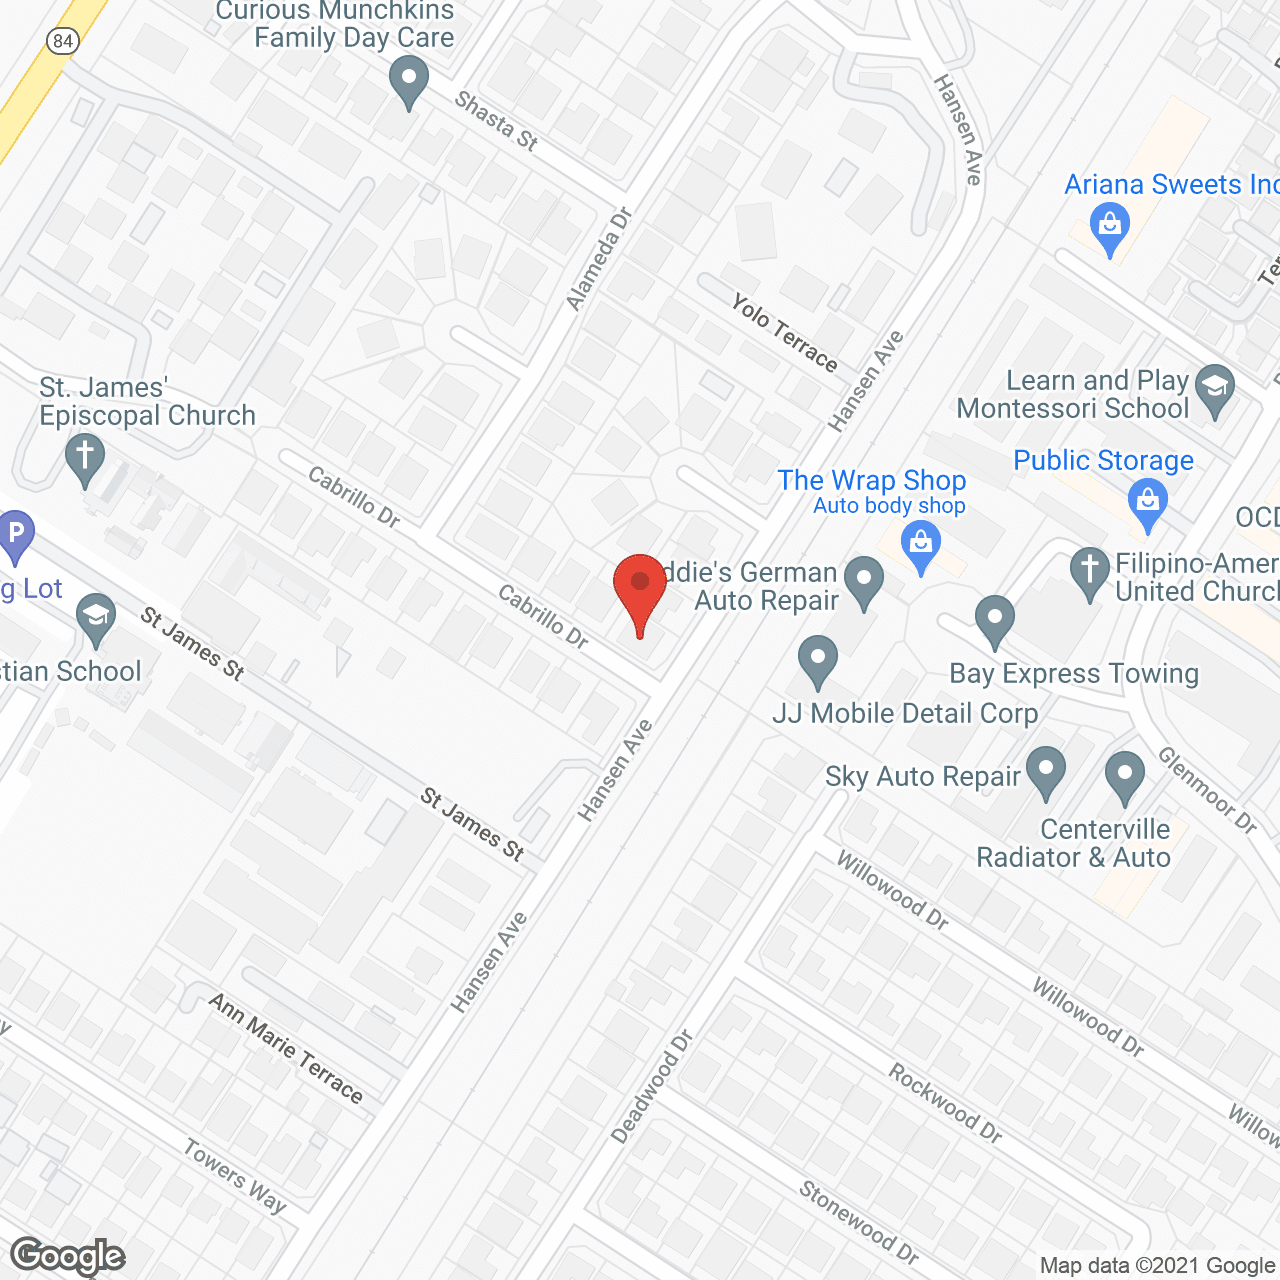 Footprint Care Home in google map